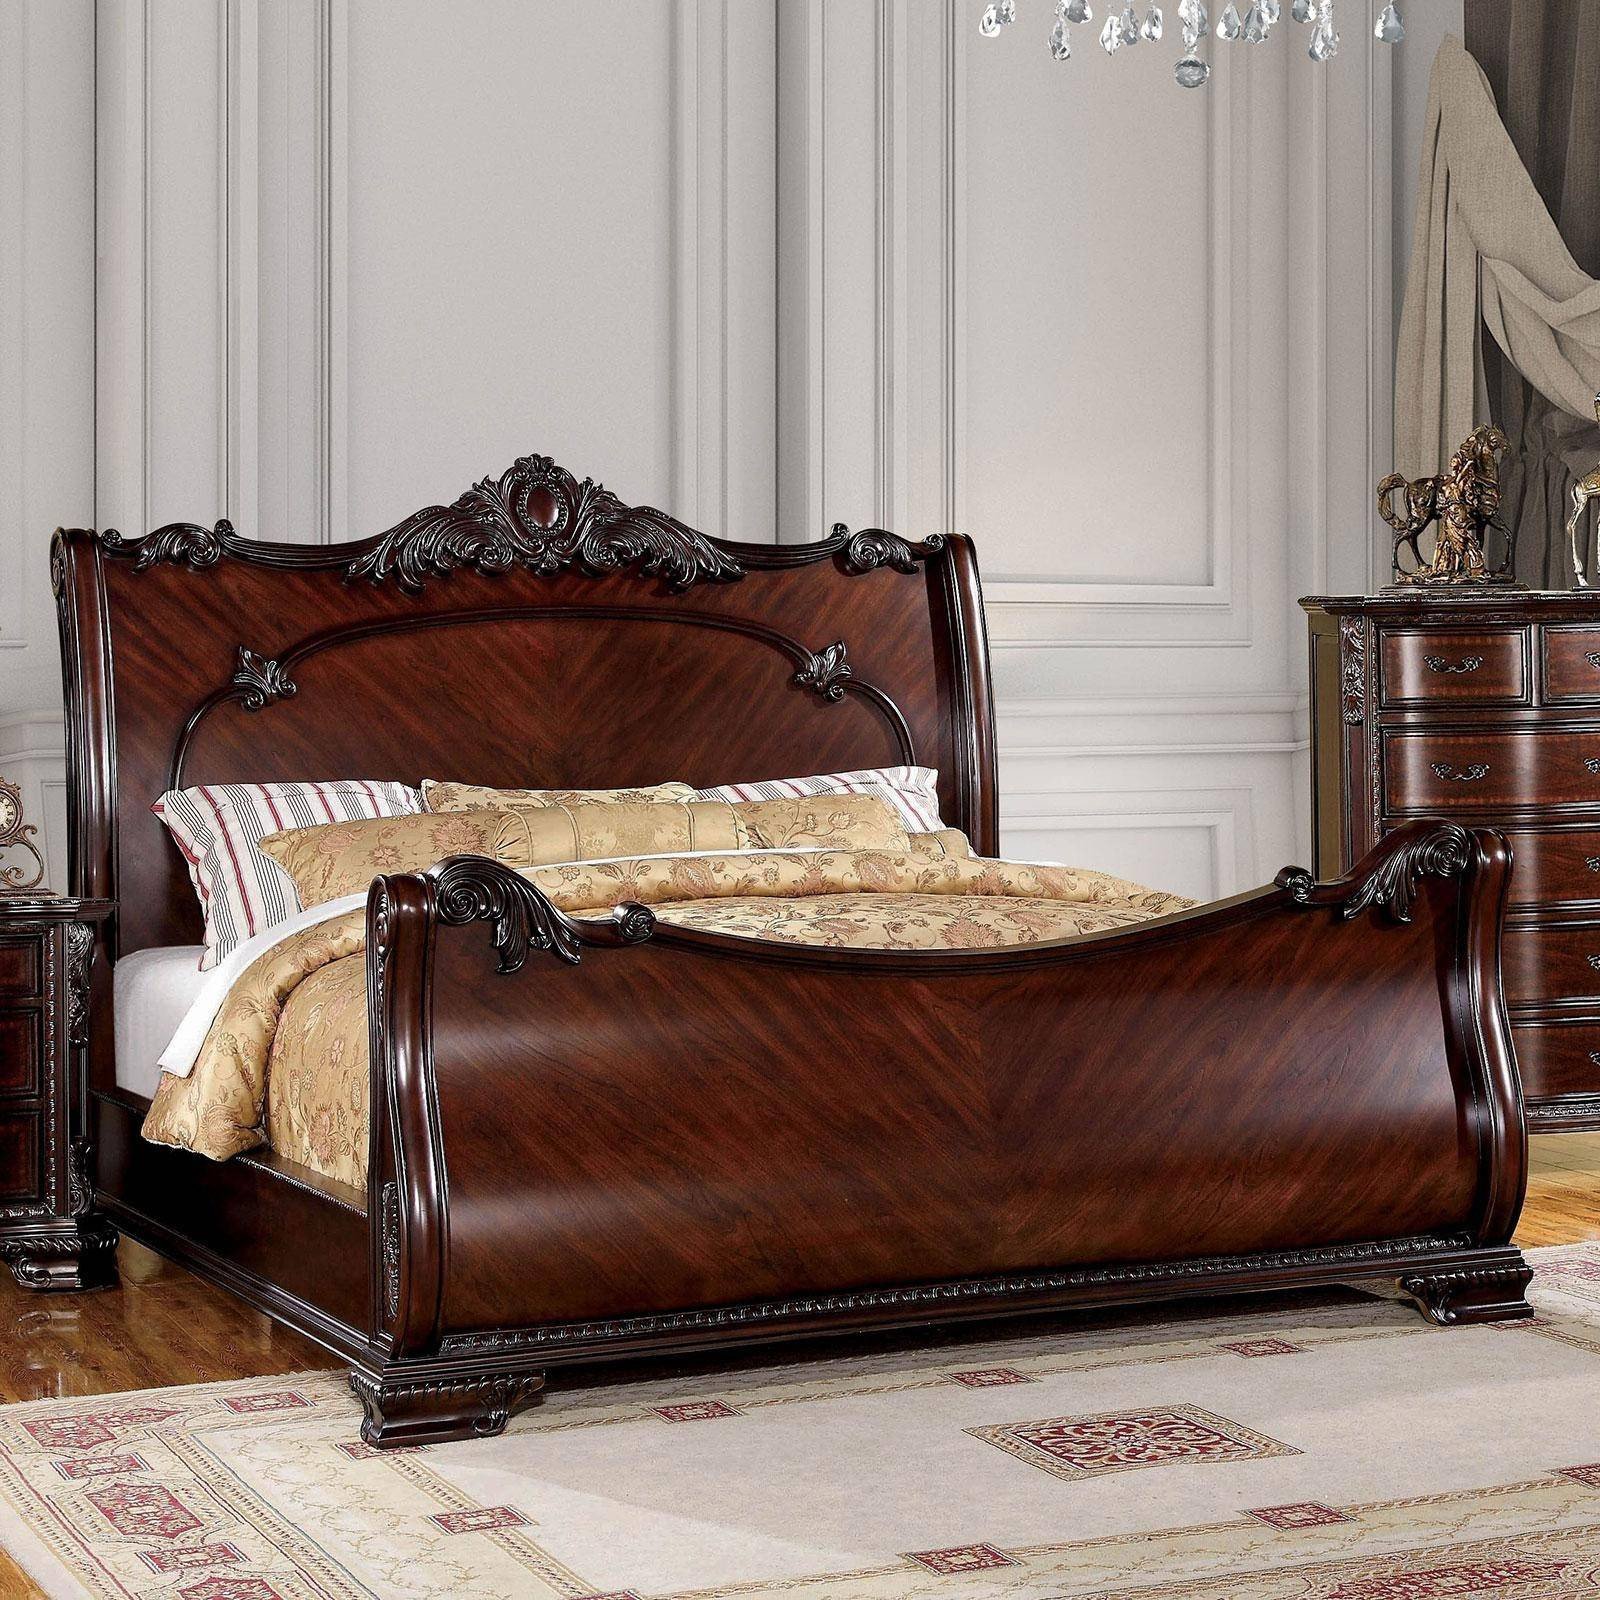 Bedroom Set California King Inspirational Traditional Wood California King Sleigh Bed In Brown Bellefonte by Foa Group